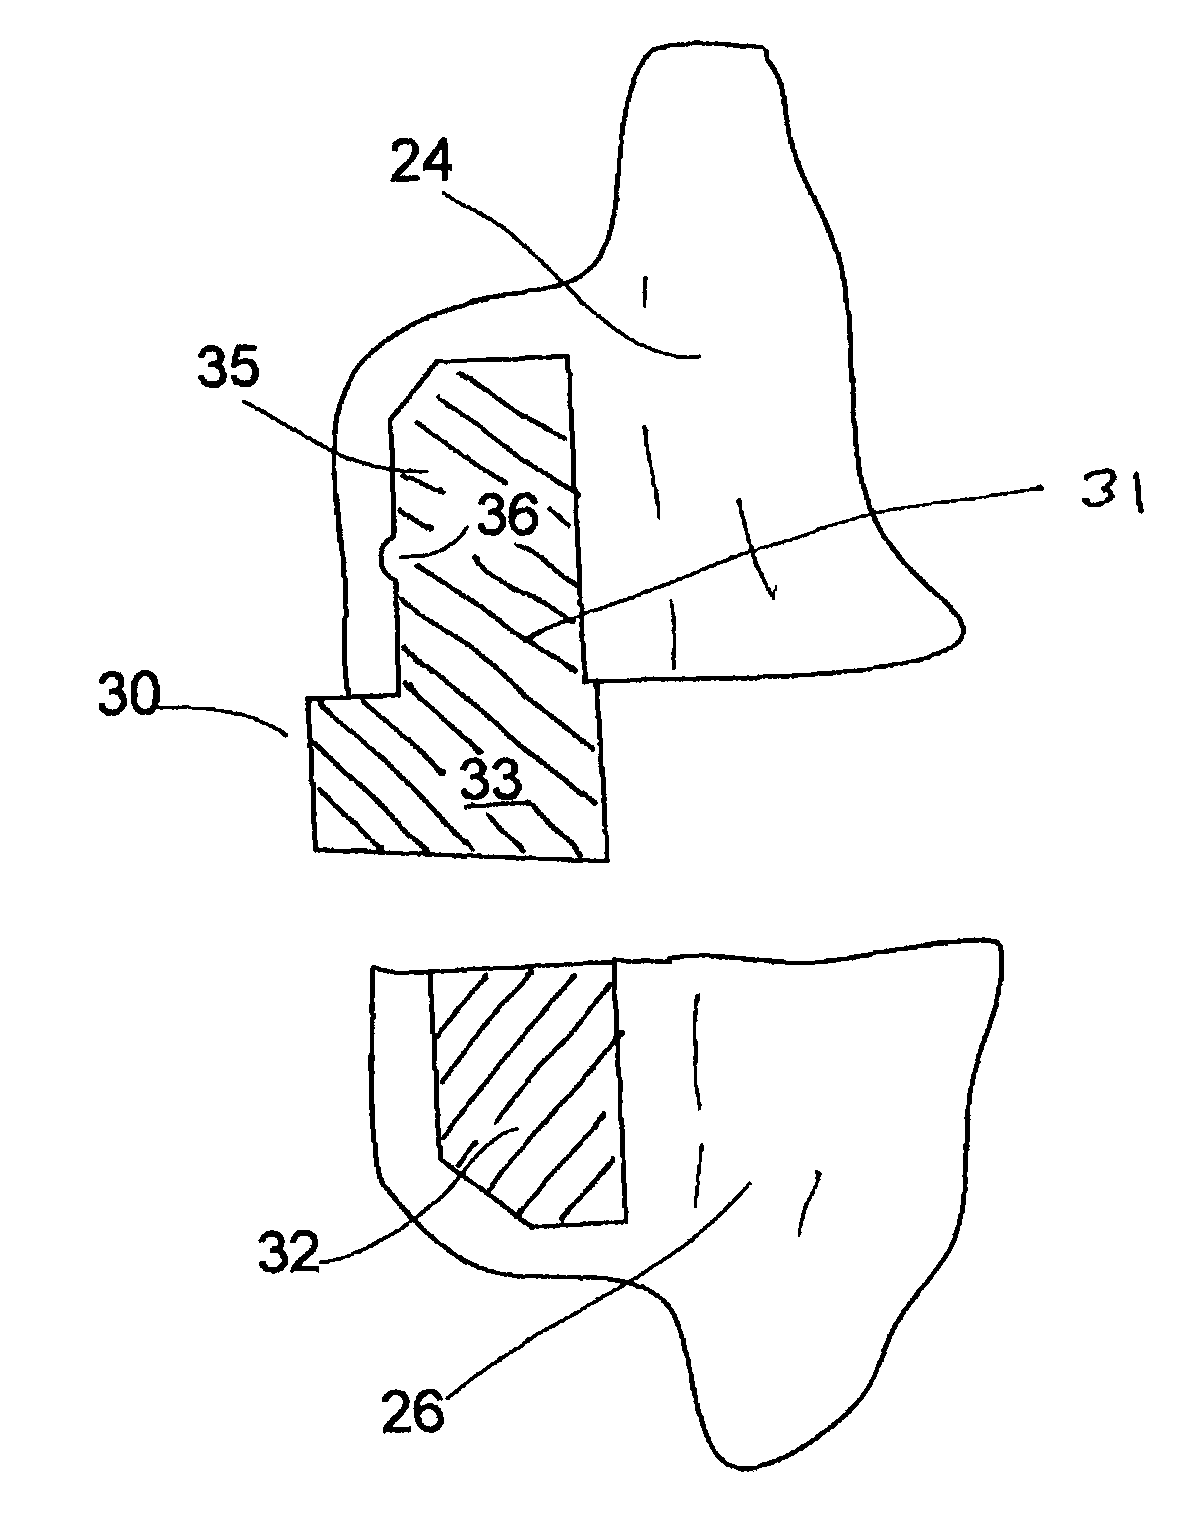 Methods of making and using an ankle-foot orthosis